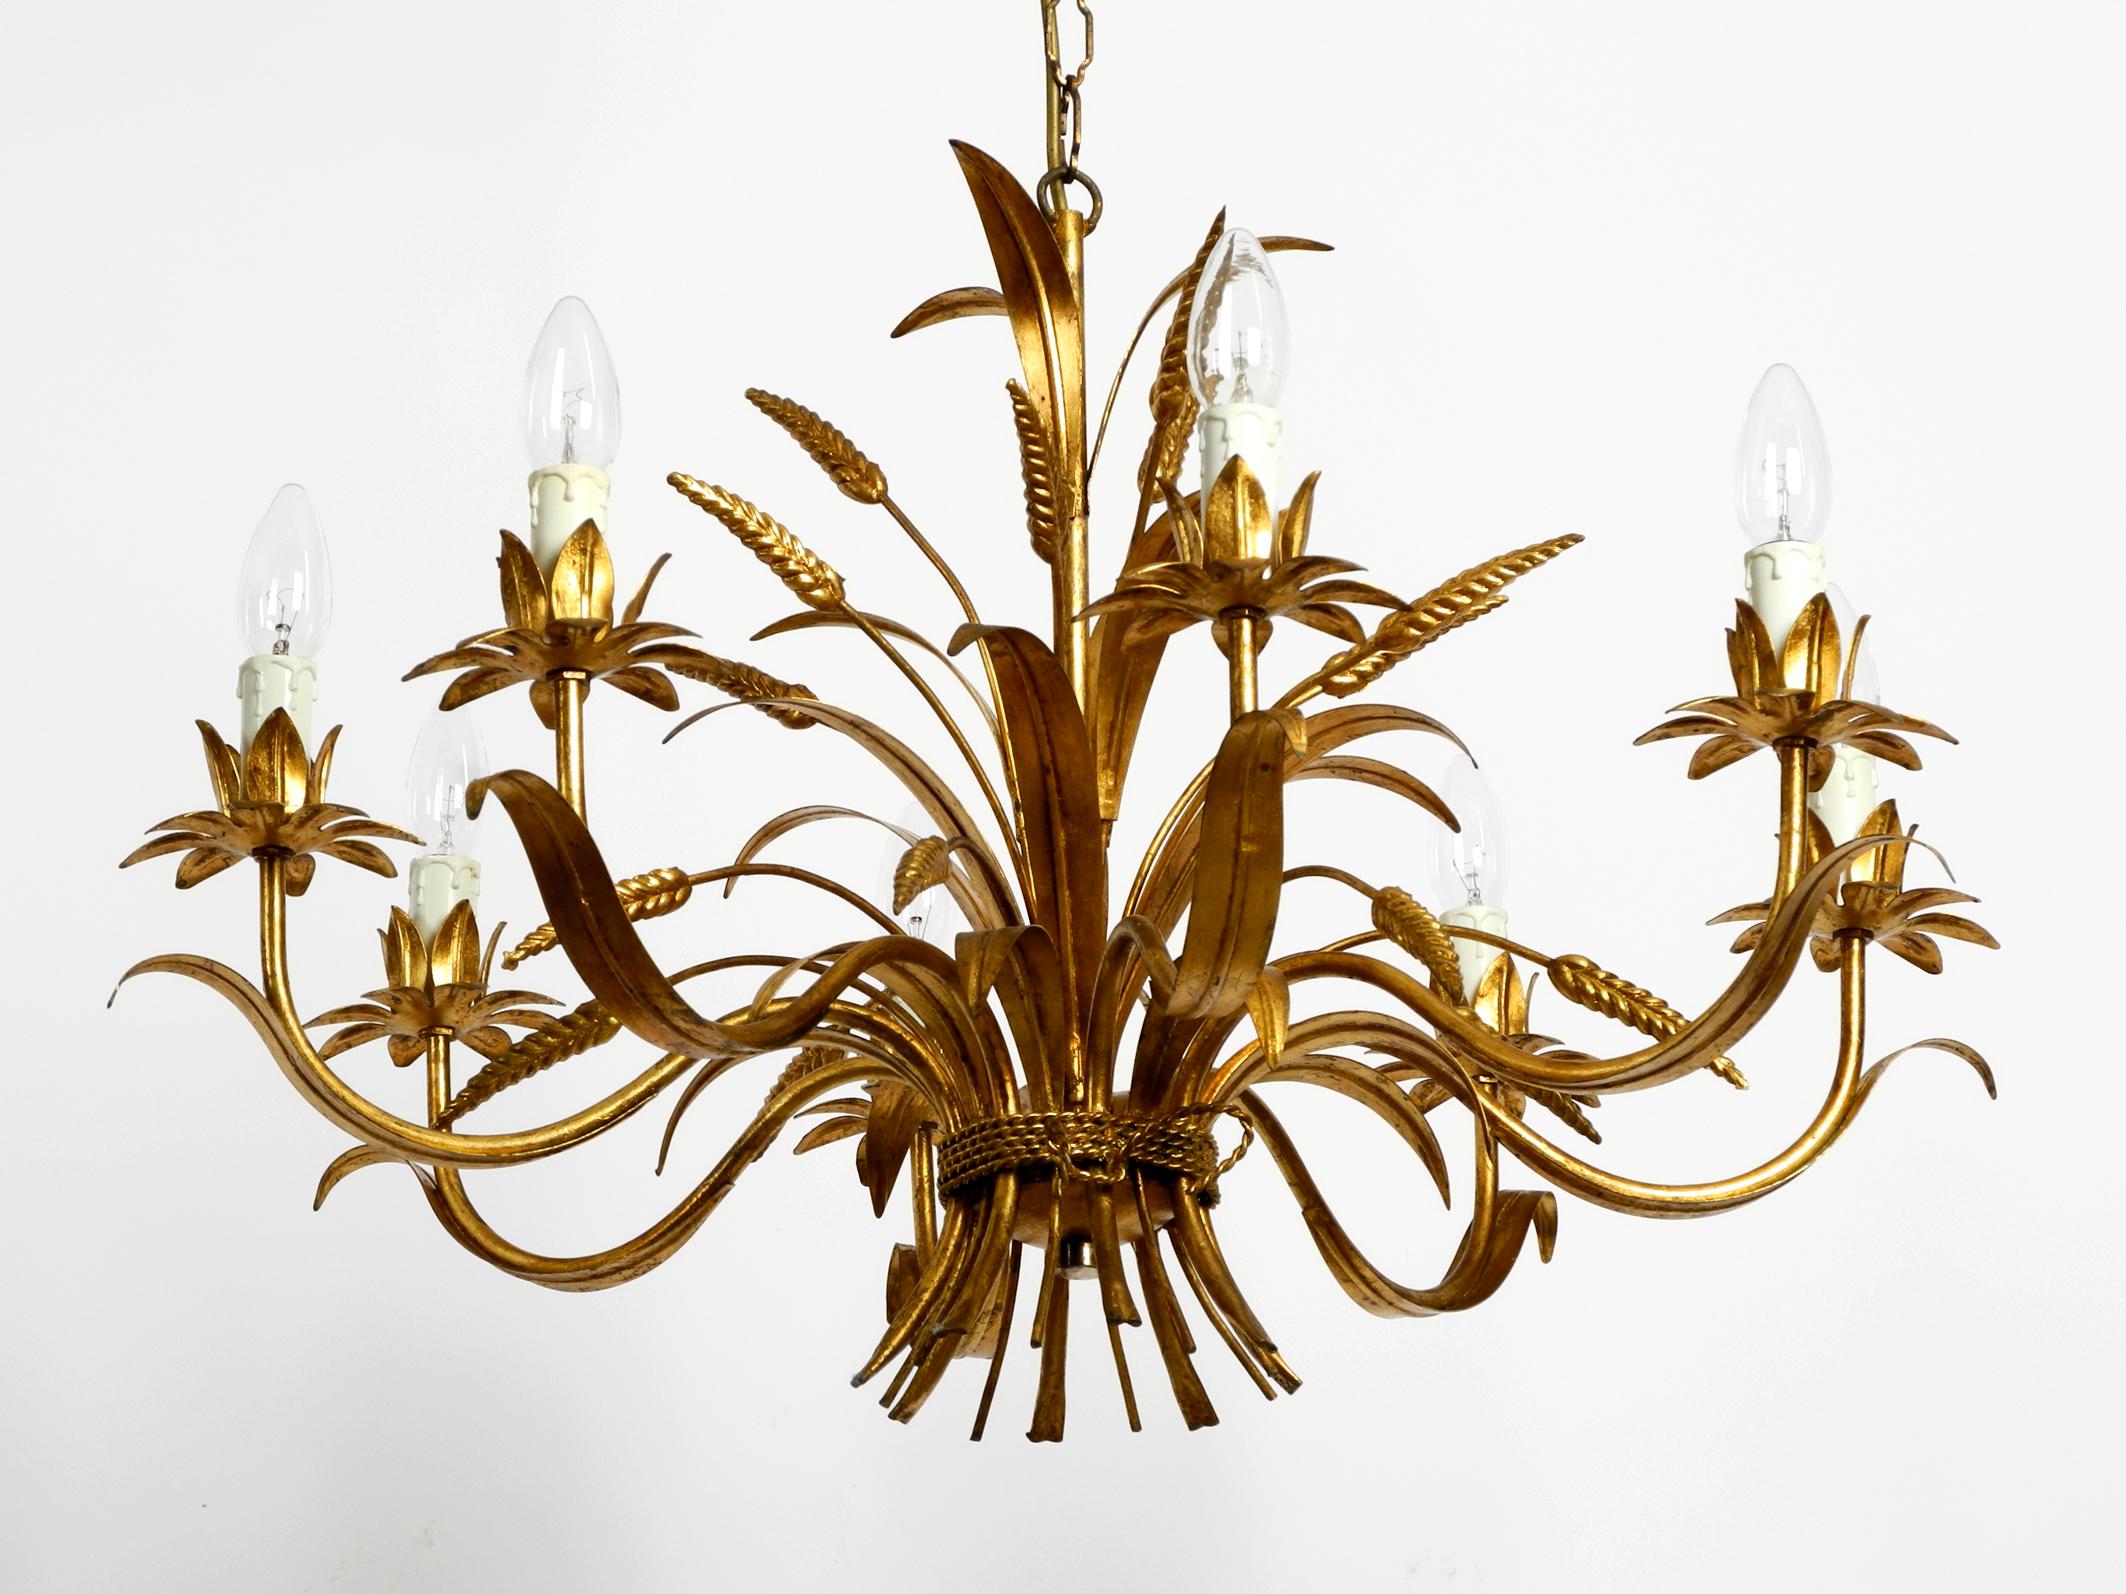 Beautiful, large 1970s gold-plated 8-arm metal chandelier by Hans Kögl.
Hans Kögl was a famous light and table designer. 
He worked with natural shapes like palm leaves and plant shapes. 
His designs were produced in both Germany and Italy.